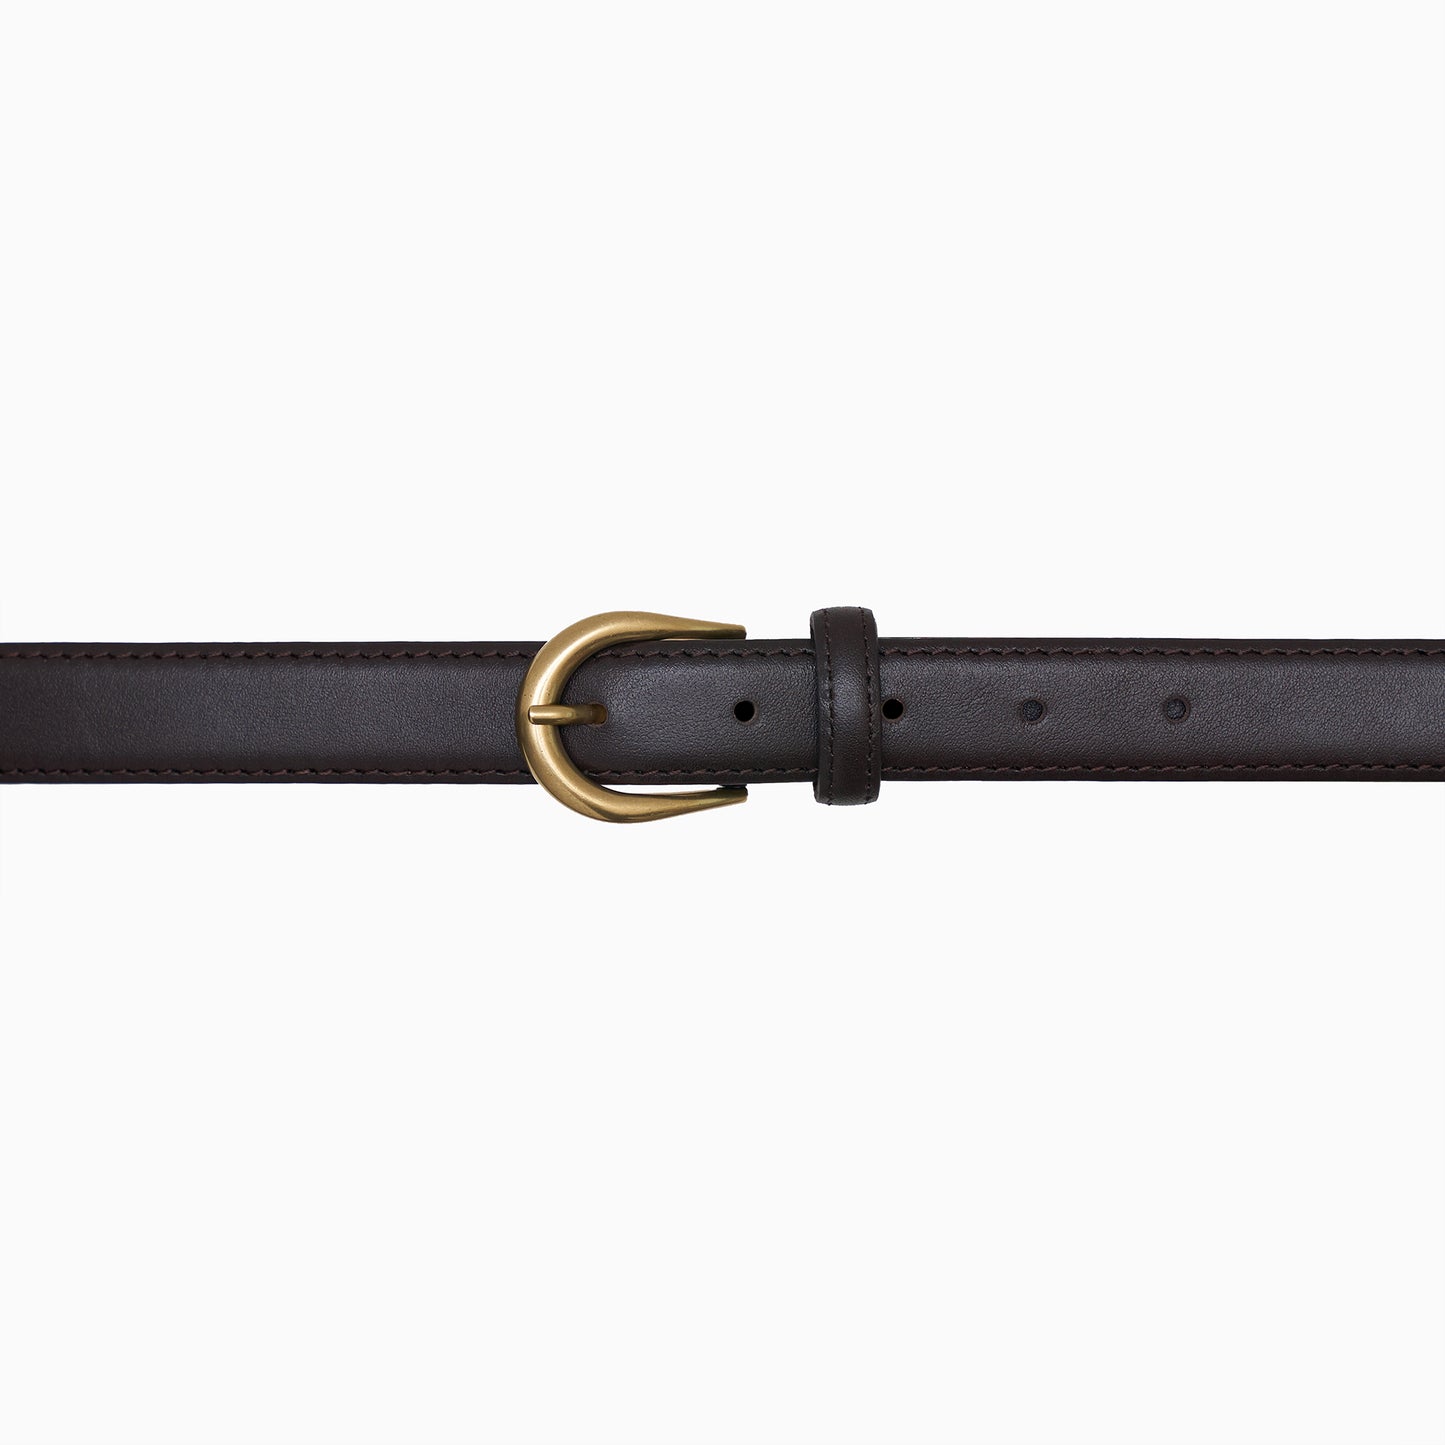 The Brown Classic - 1" Leather Belt